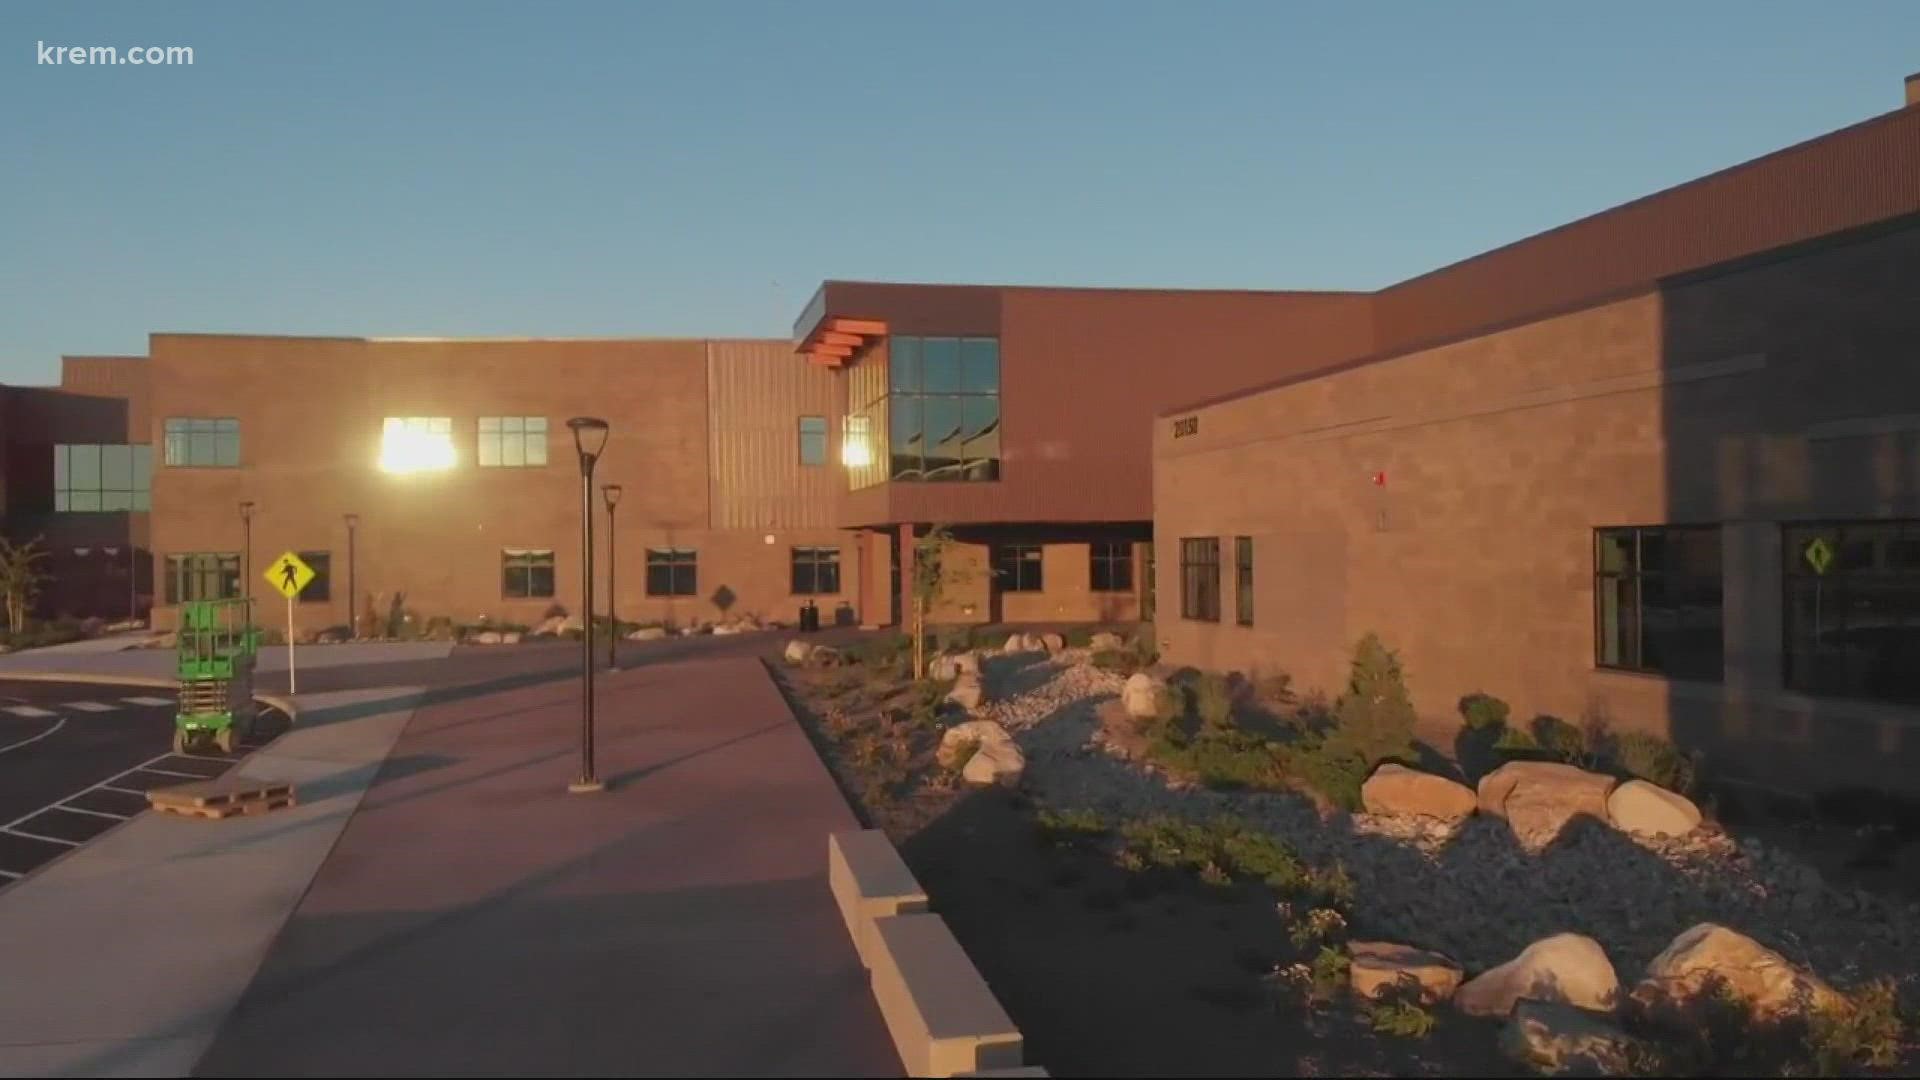 The new Central Valley School District building is the first high school to open in Spokane County in more than 24 years.